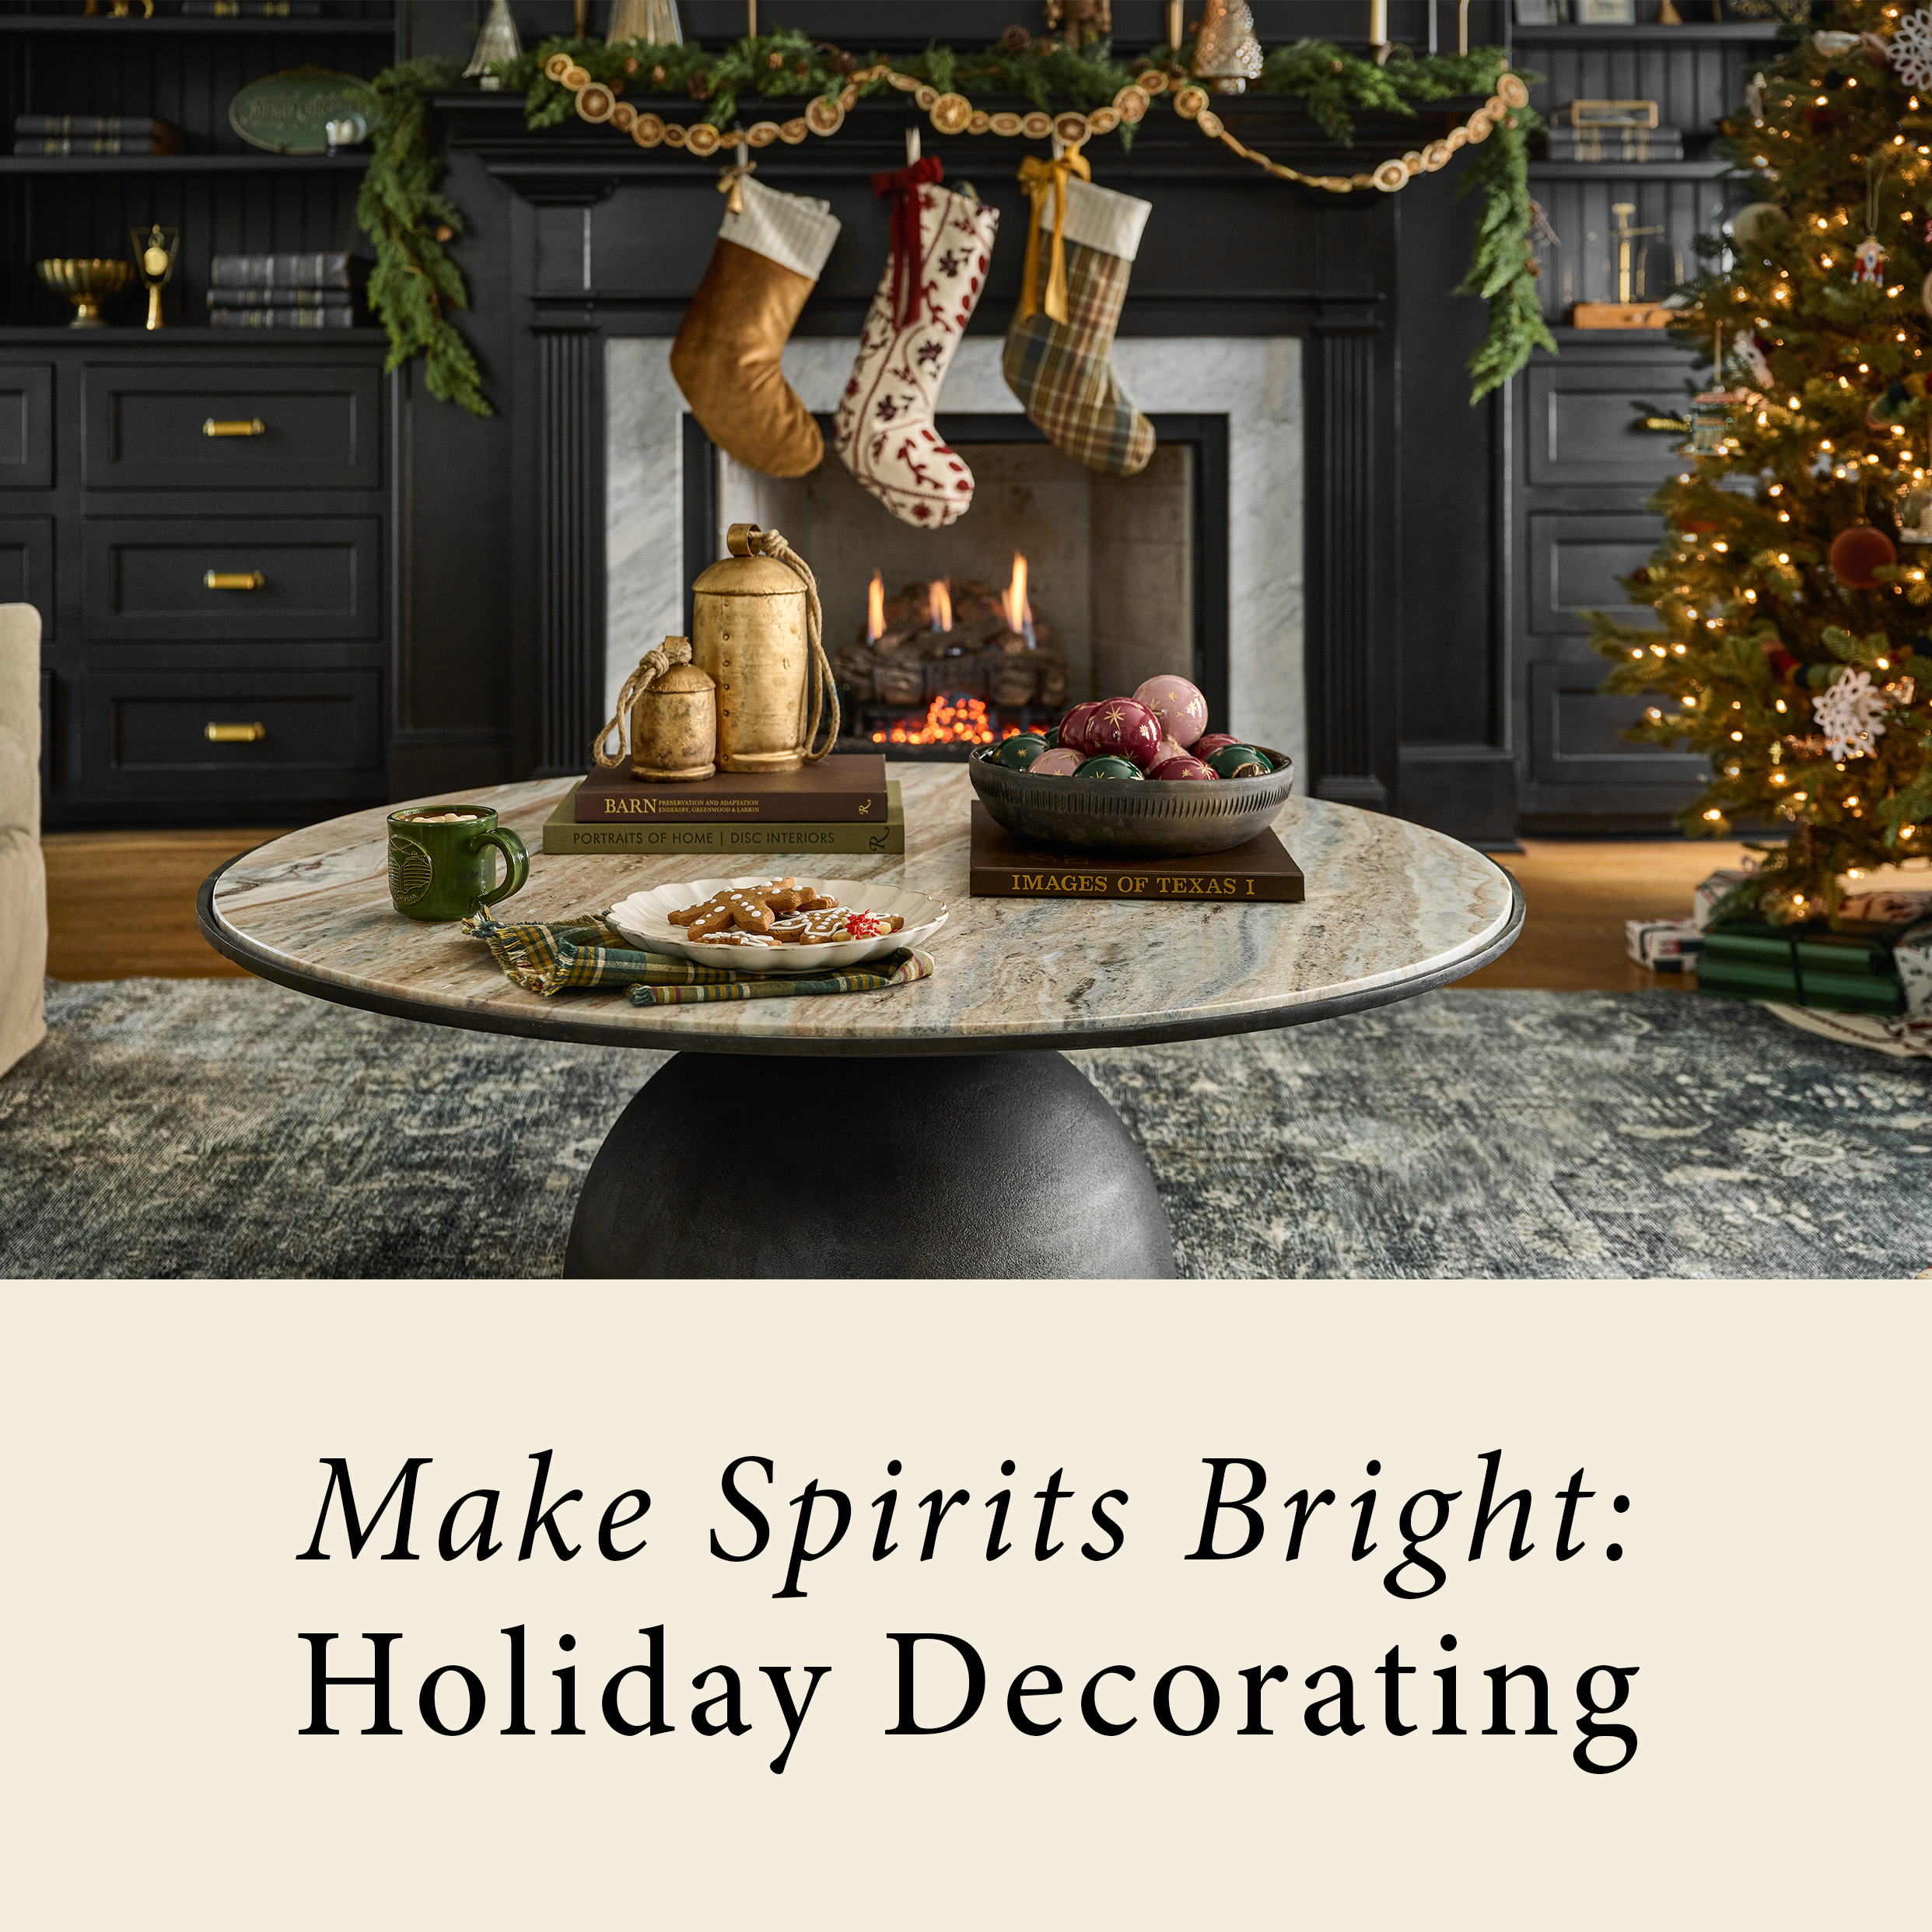 make spirits bright: holiday decorating - a photo of stockings hung above a fireplace